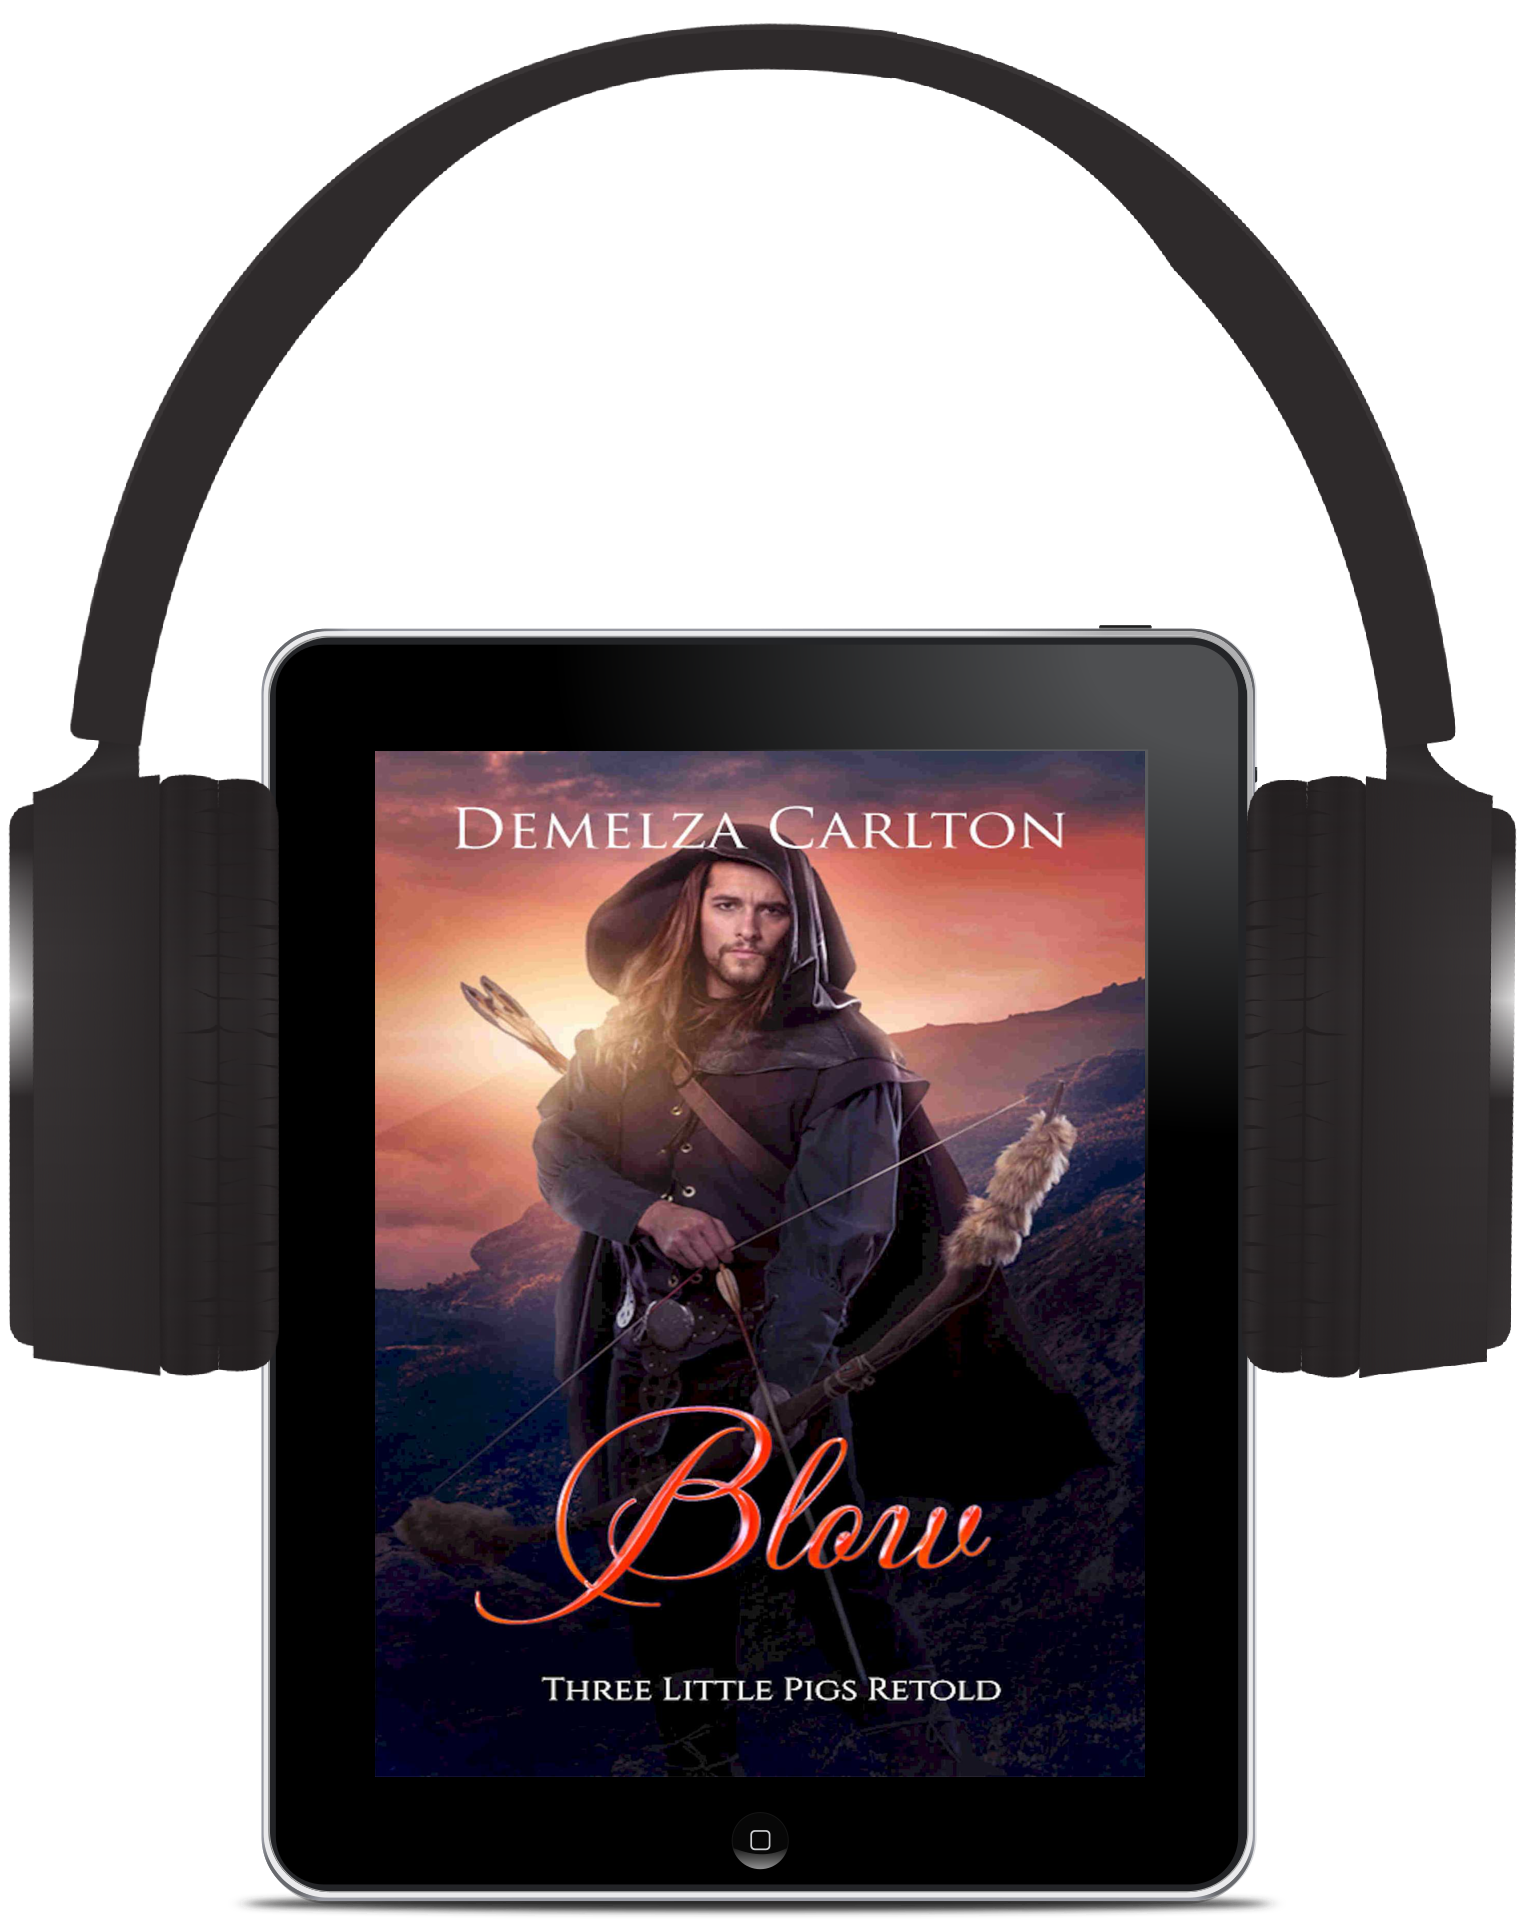 Blow: Three Little Pigs Retold (Book 9 in the Romance a Medieval Fairytale series) AUDIOBOOK